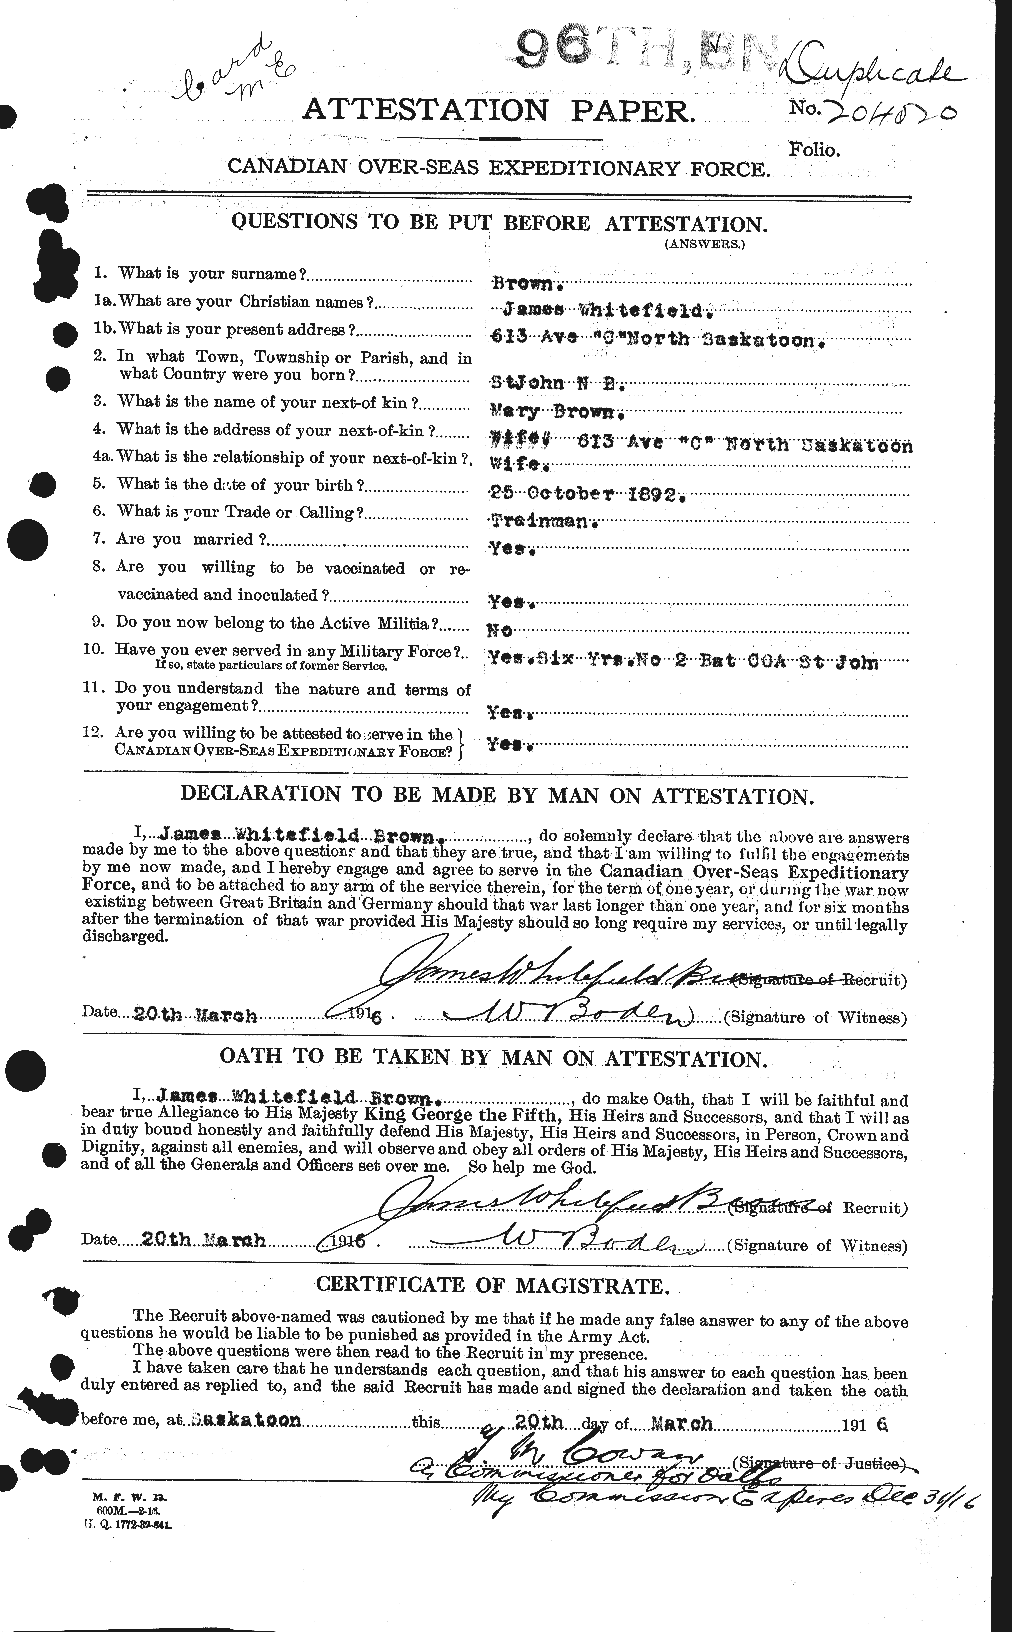 Personnel Records of the First World War - CEF 269596a